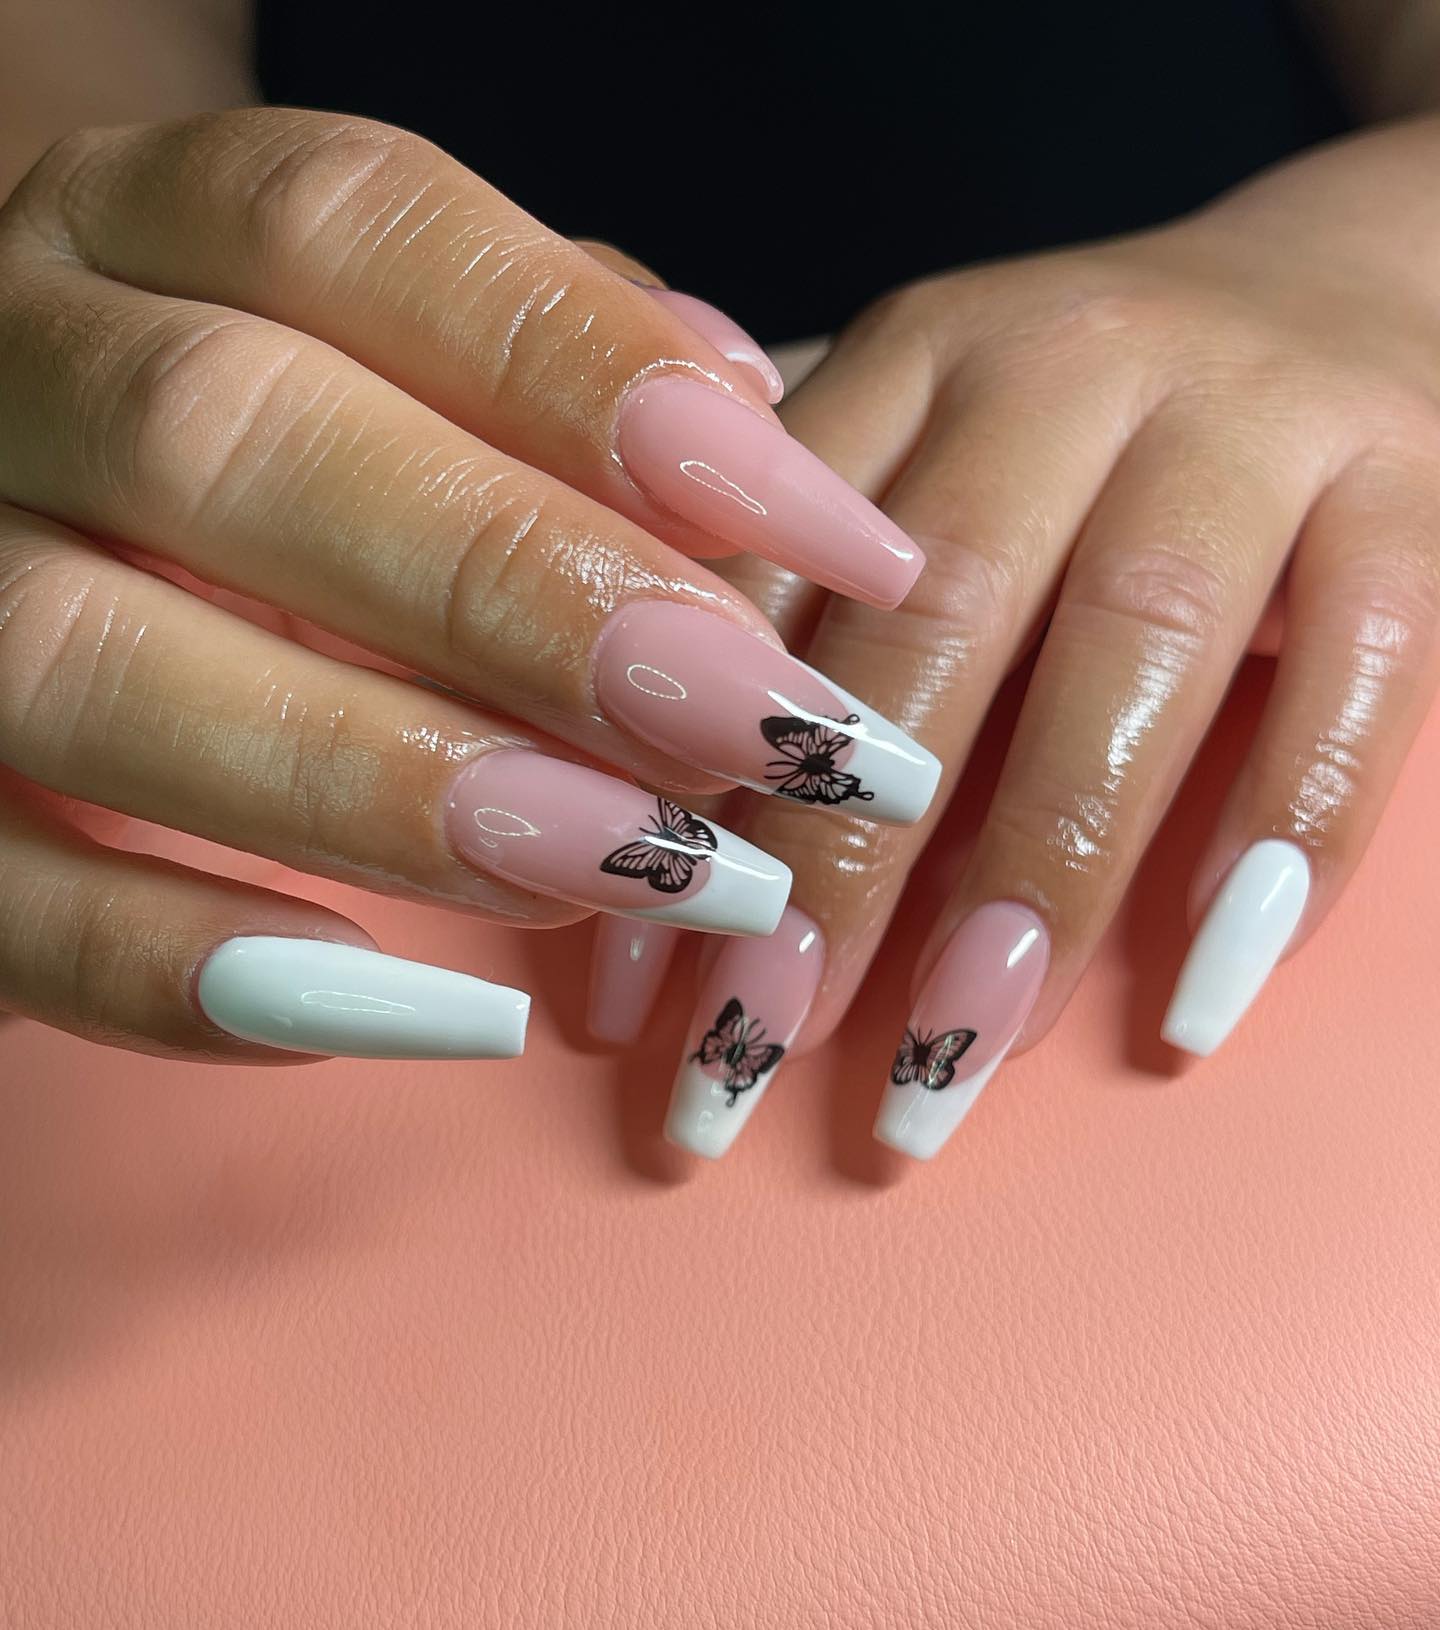 You can add some simple and basic butterfly nail design on your french mani. You will definitely look classy and cute with this.